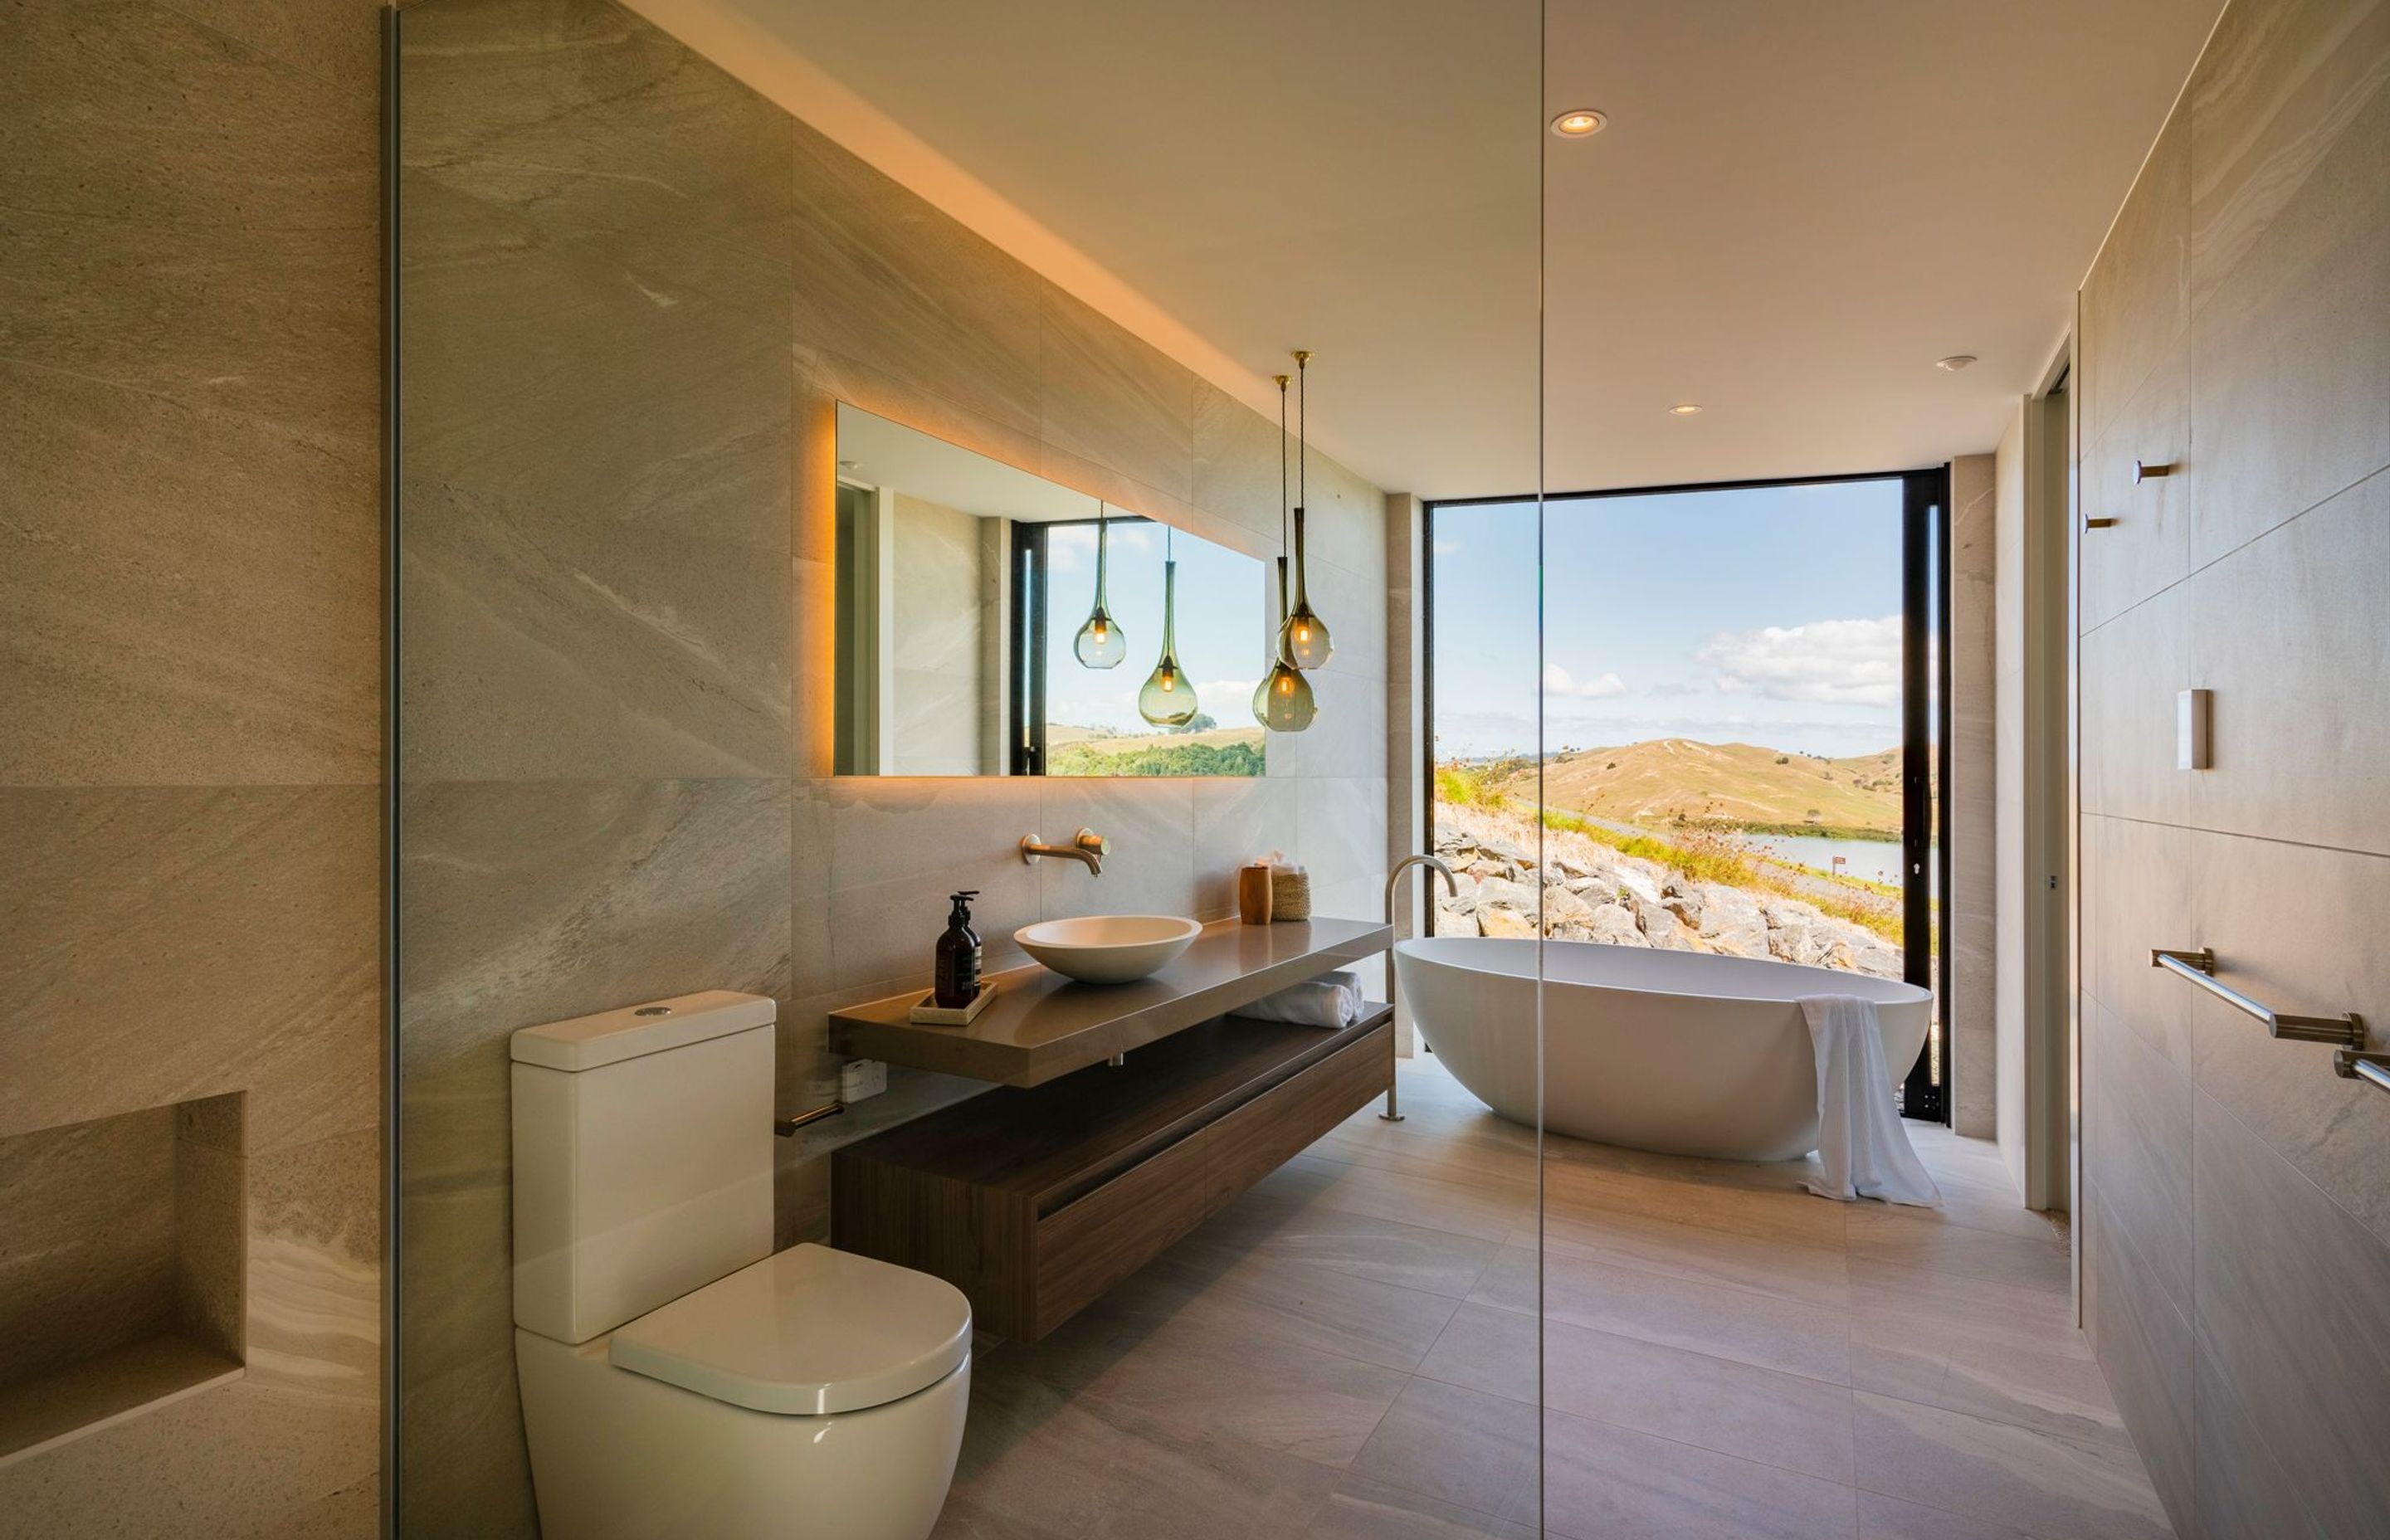 Every detail has been considered in the bathroom, with a bespoke vanity, large format tiles and a Waterware bathtub that overlooks the stunning view.